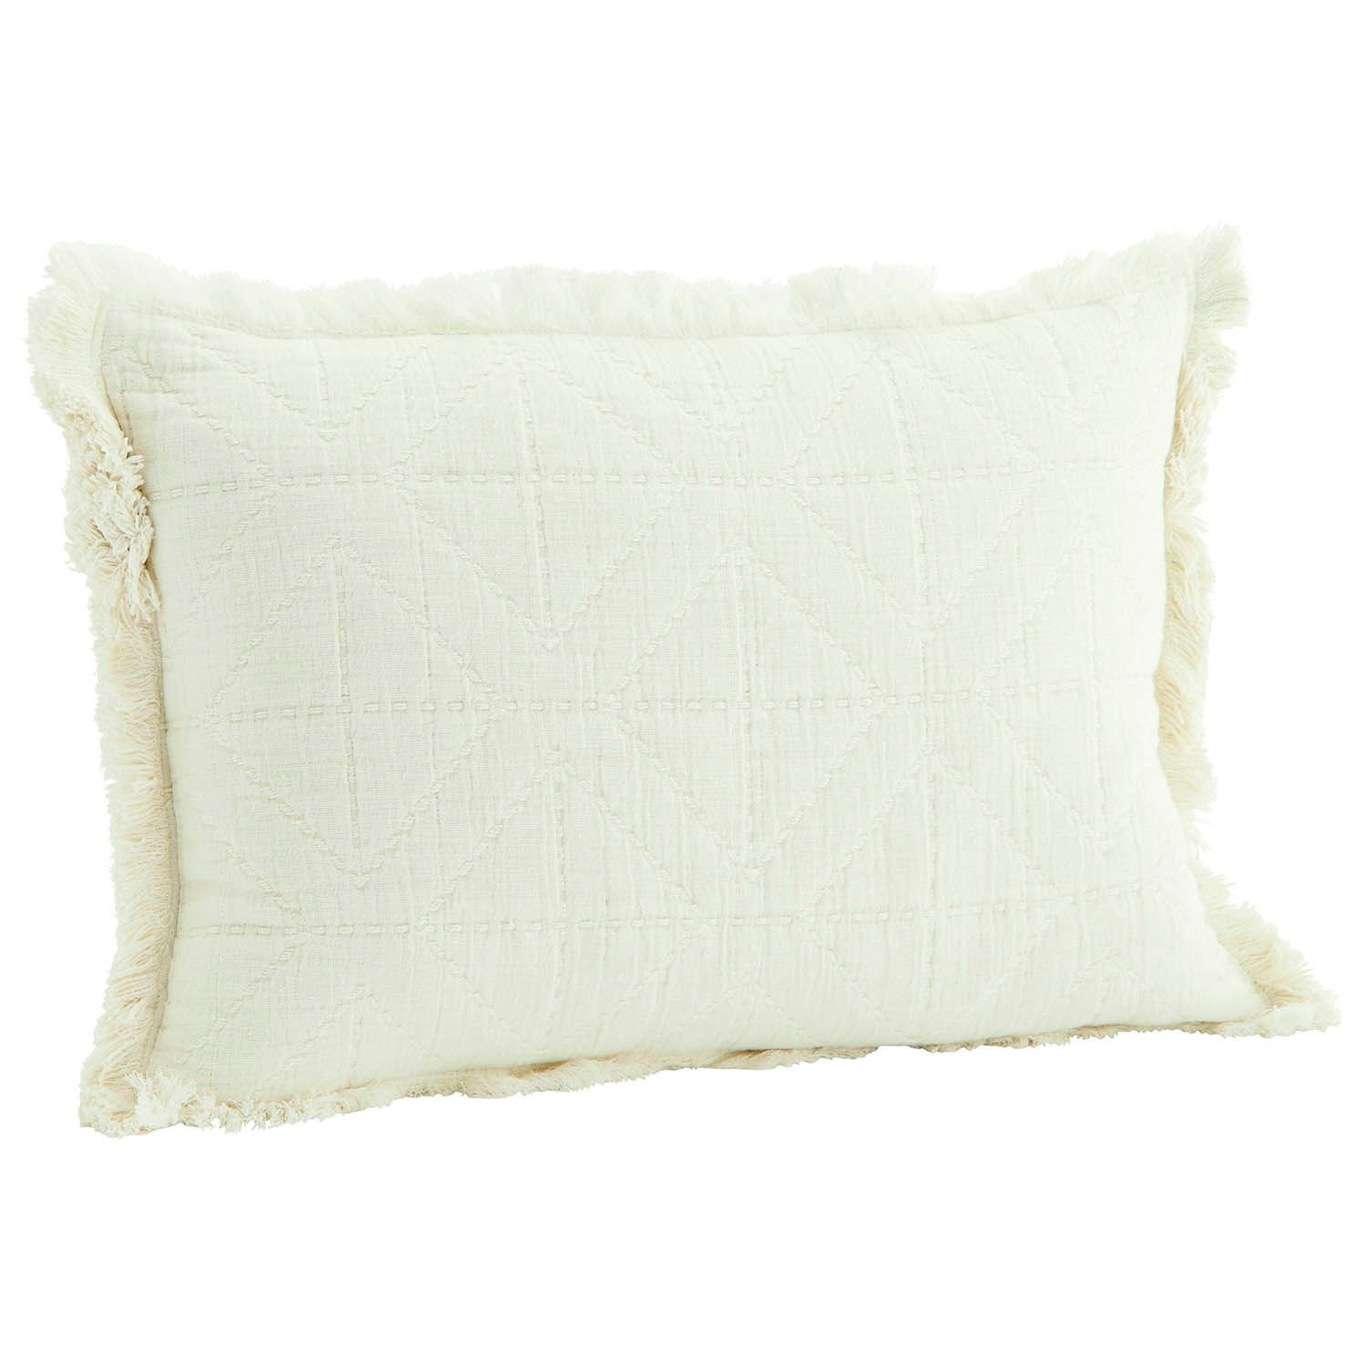 Embroidered Cushion Cover 30x45 cm, Off-white